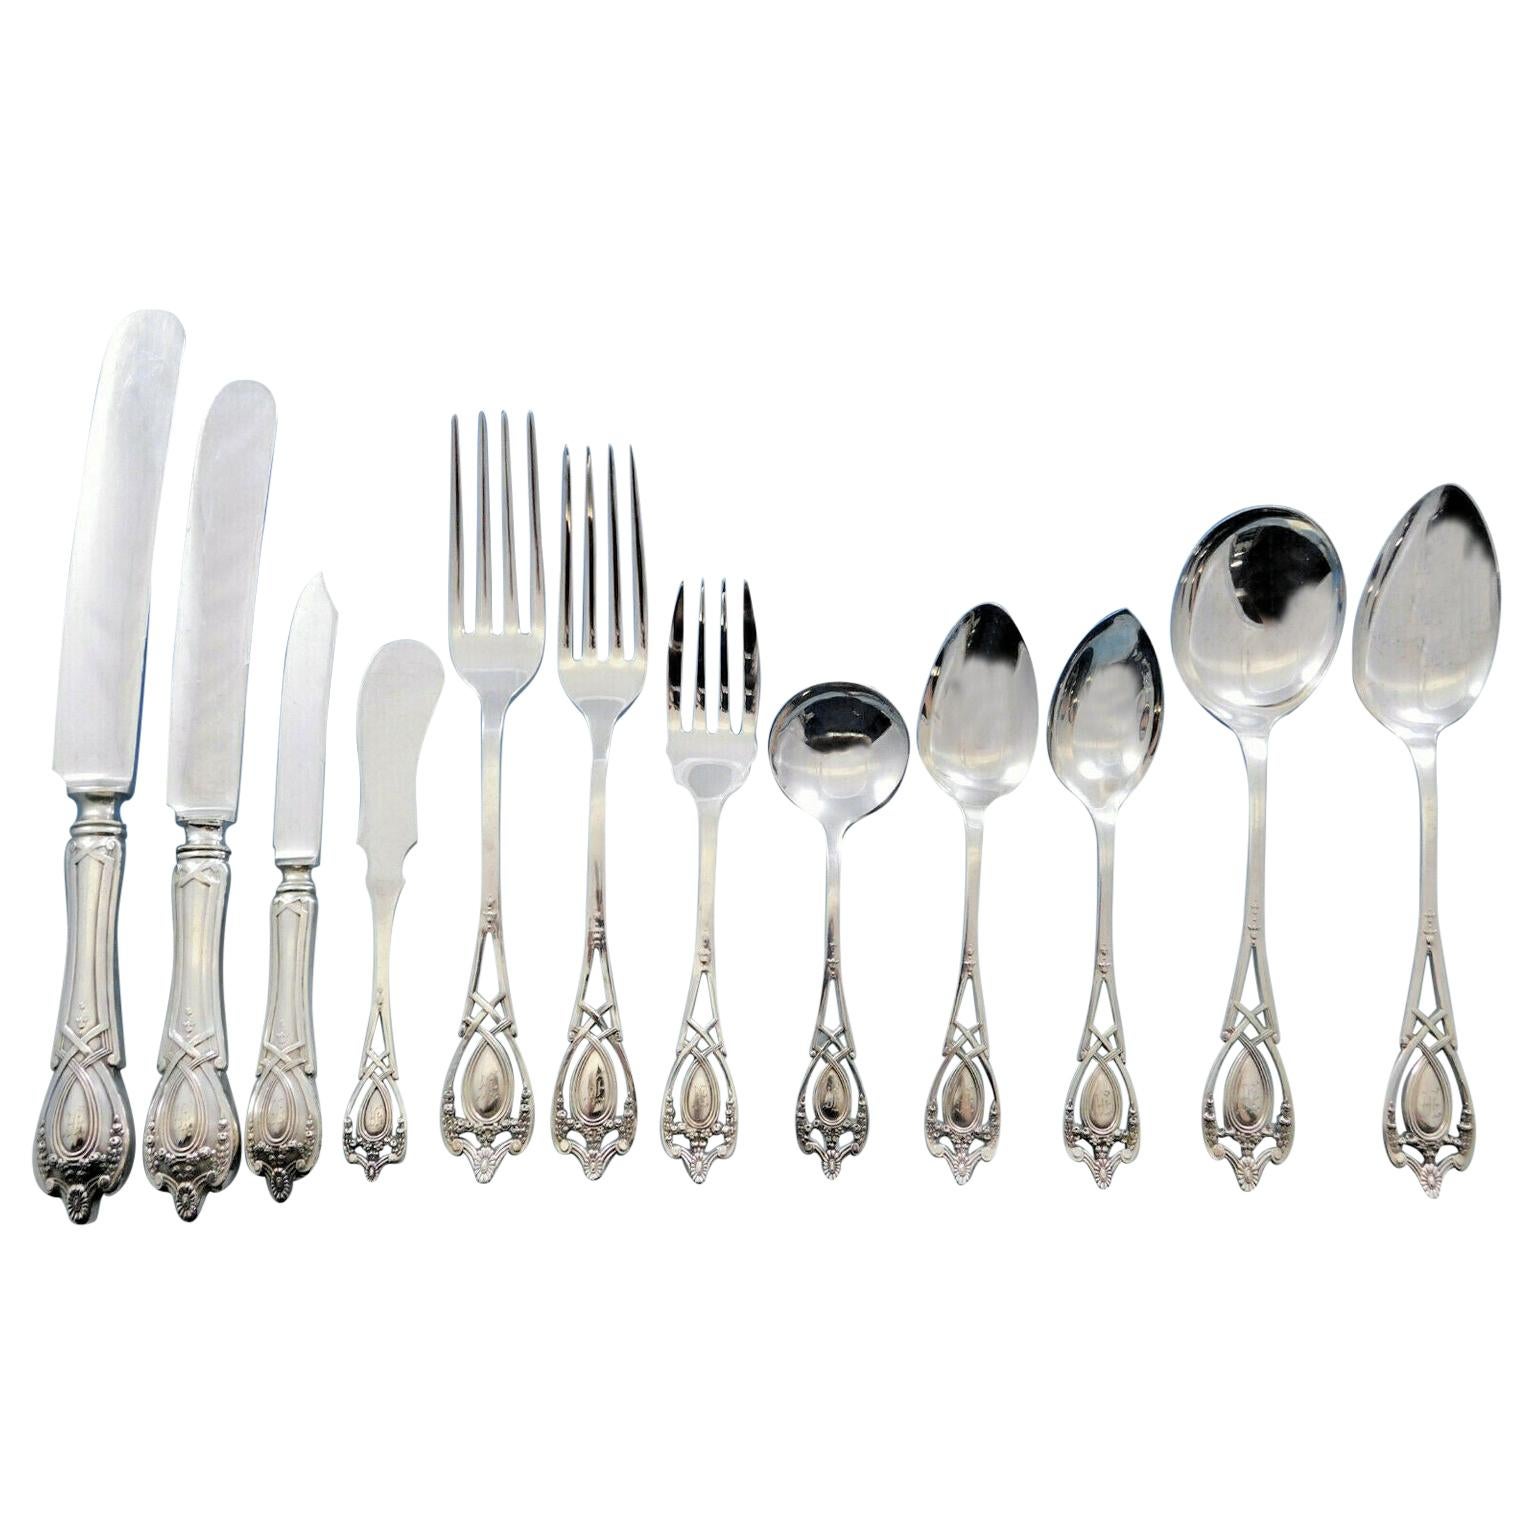 Monticello by Lunt Sterling Silver Flatware Set for 12 Service 144 Pieces Dinner